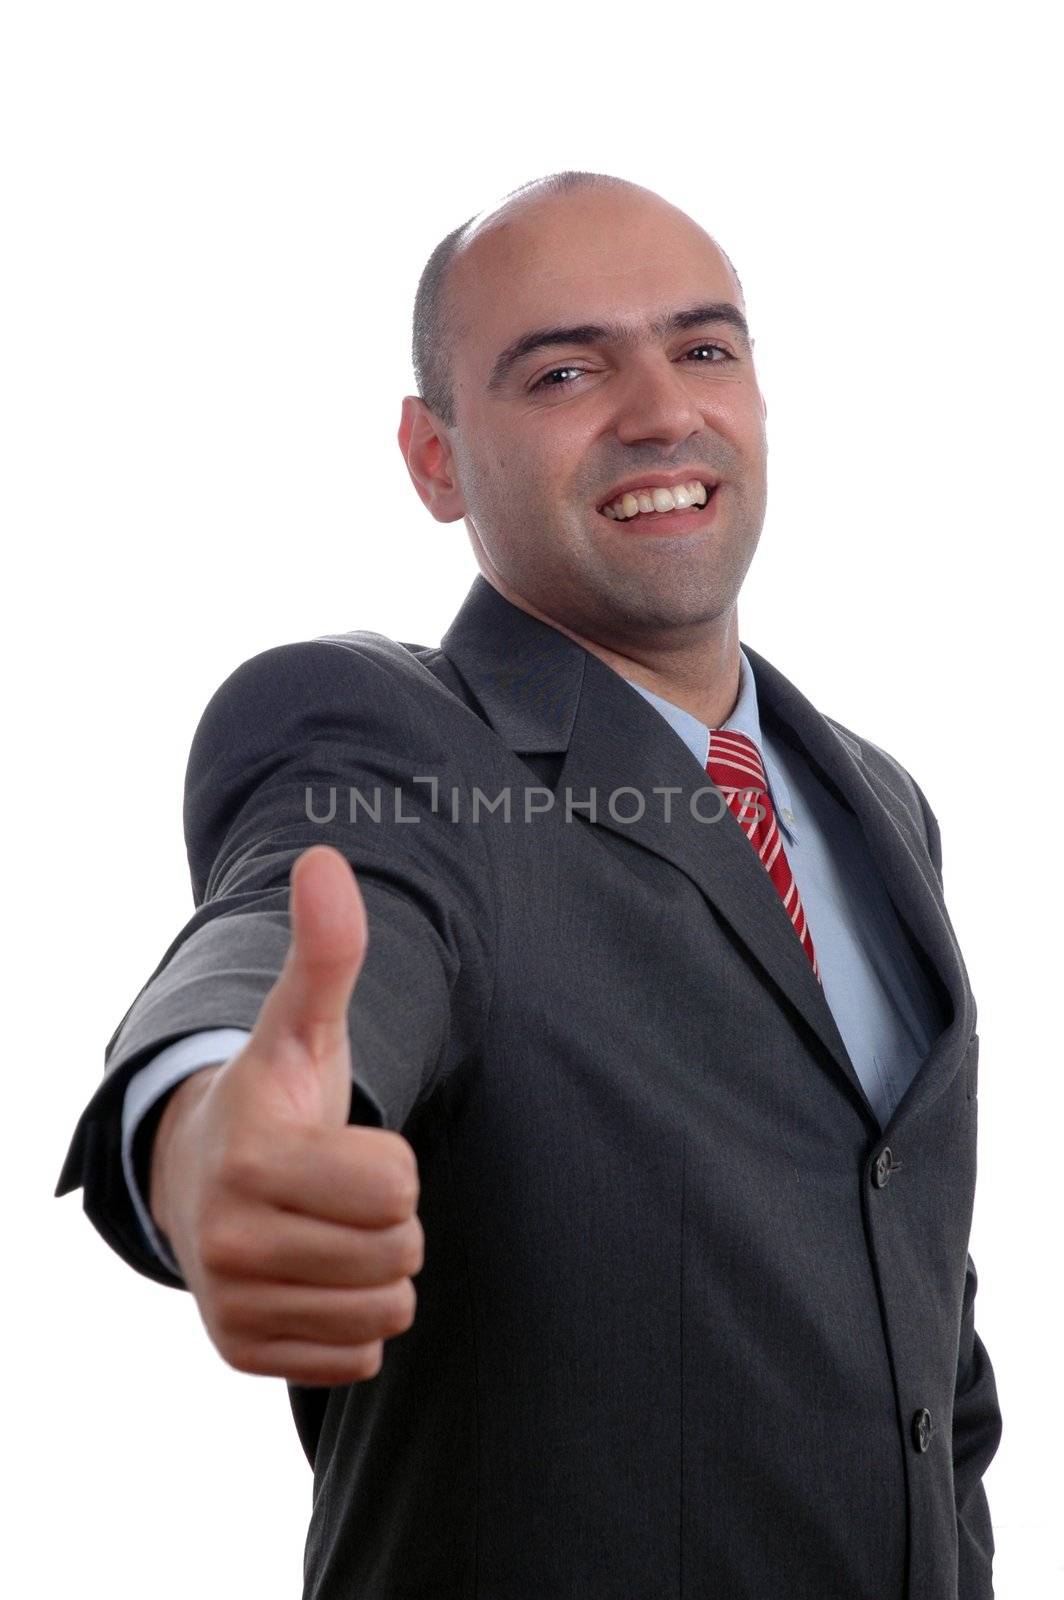 bald businessman thumb up isolated ove white background by raalves